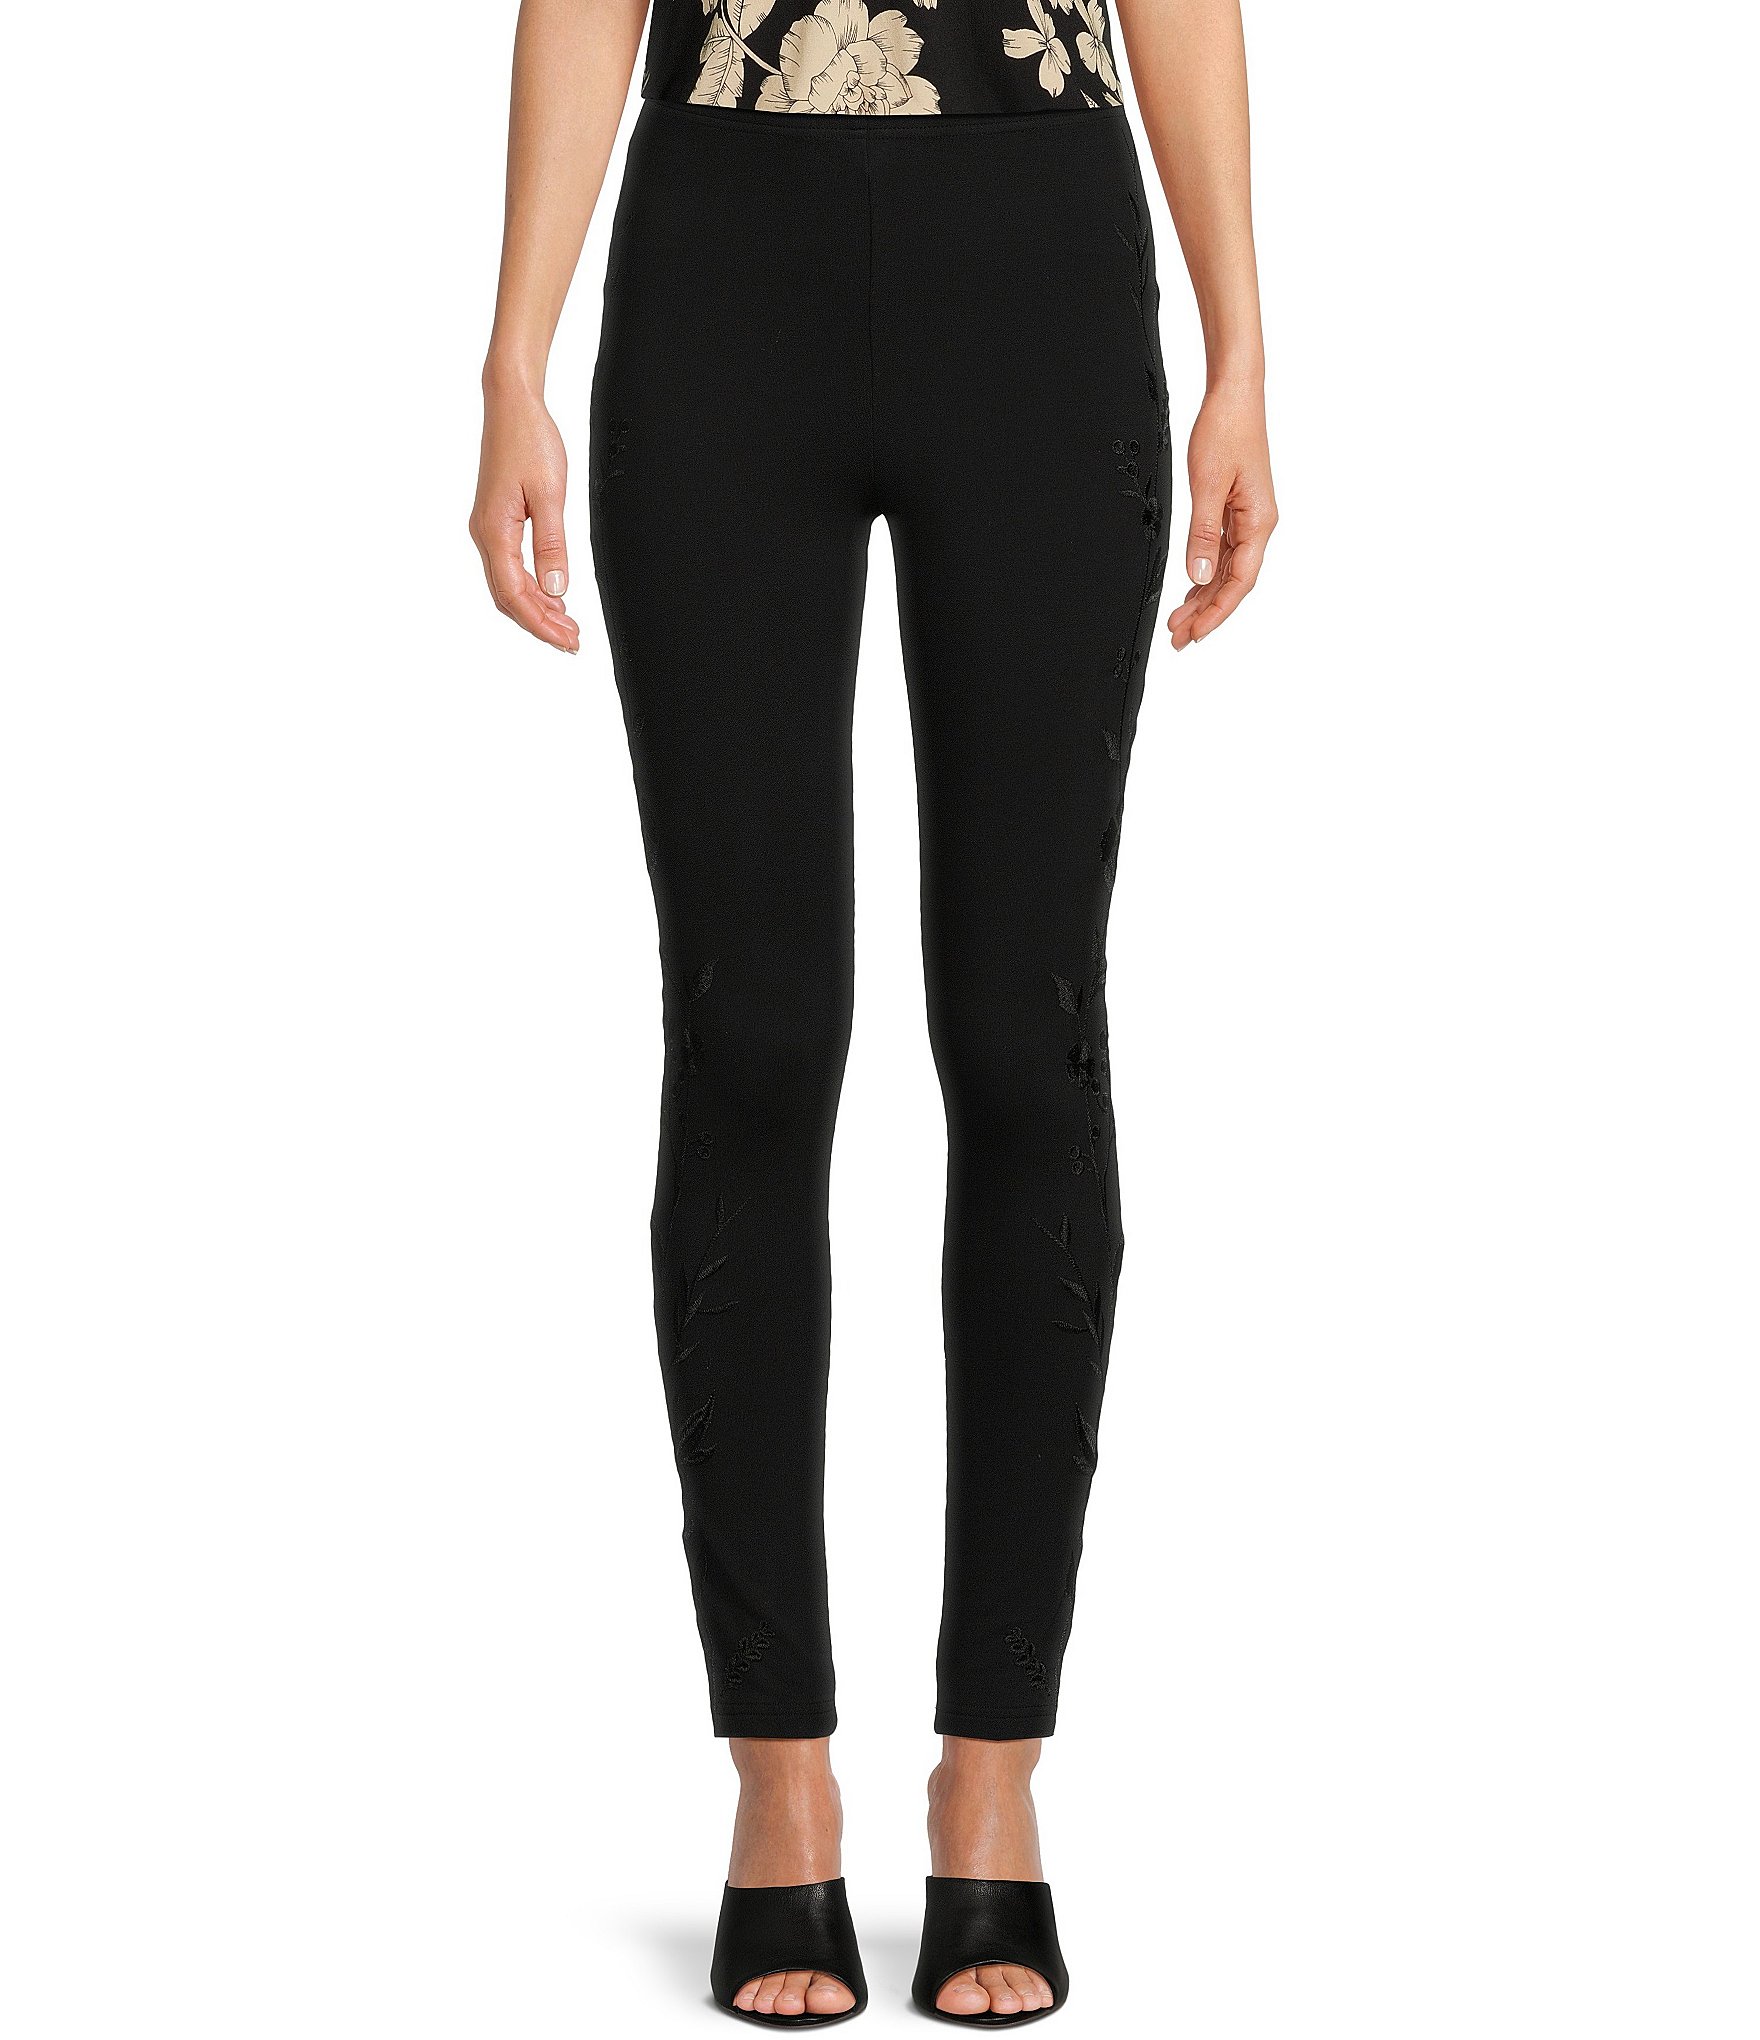 https://dimg.dillards.com/is/image/DillardsZoom/zoom/johnny-was-tonal-floral-embroidery-stretch-knit-pull-on-ankle-leggings/00000000_zi_e094df71-8b3c-4e2a-879f-74547d7e2429.jpg